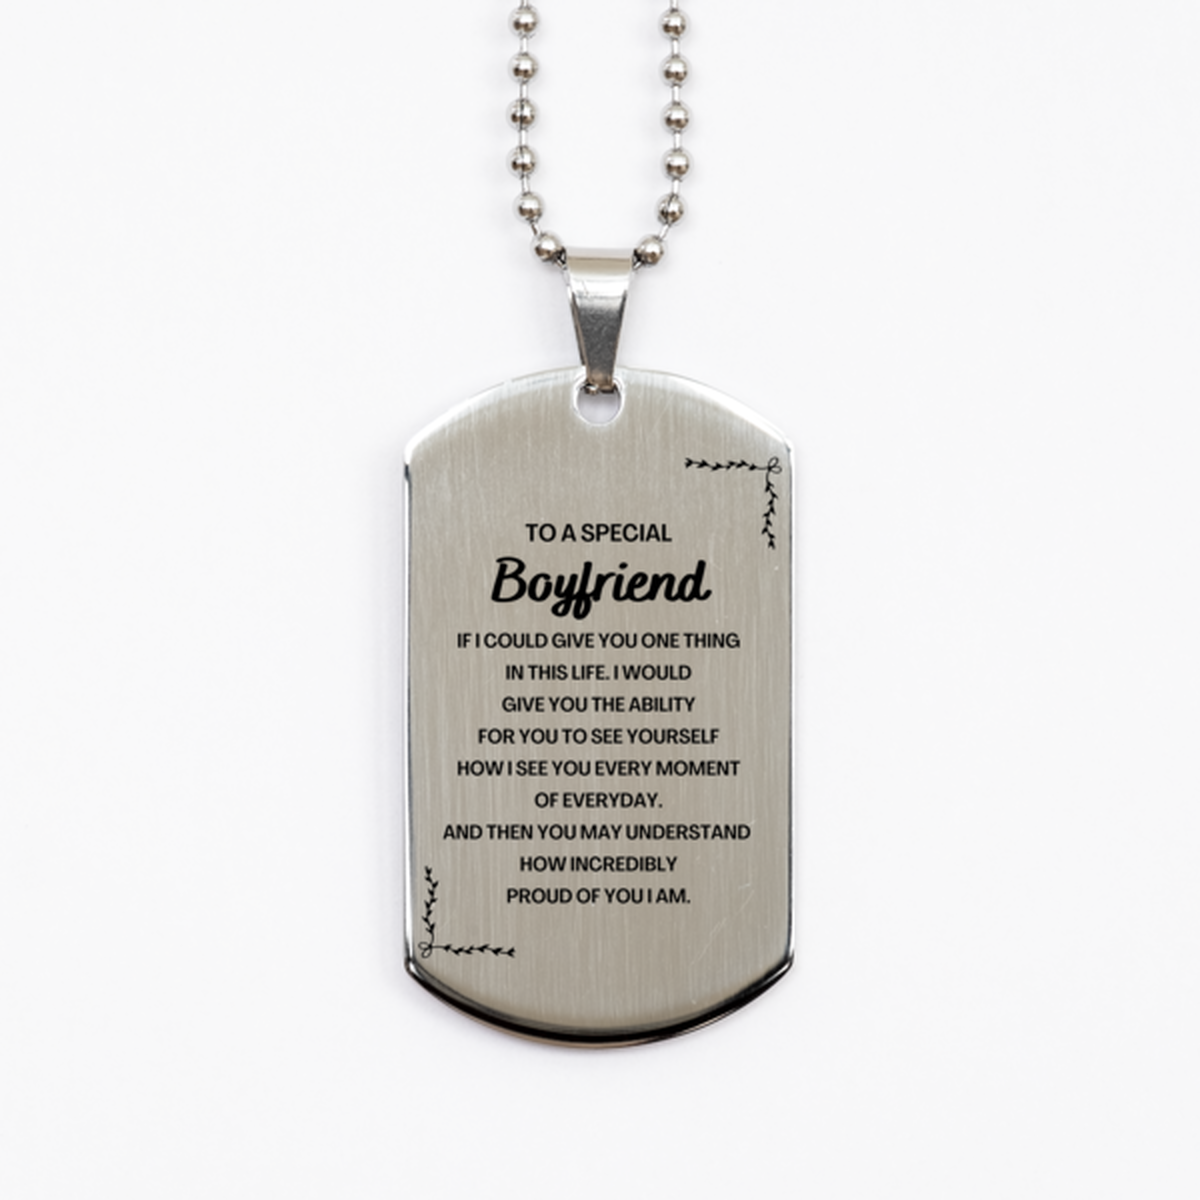 To My Boyfriend Silver Dog Tag, Gifts For Boyfriend Engraved, Inspirational Gifts for Christmas Birthday, Epic Gifts for Boyfriend To A Special Boyfriend how incredibly proud of you I am